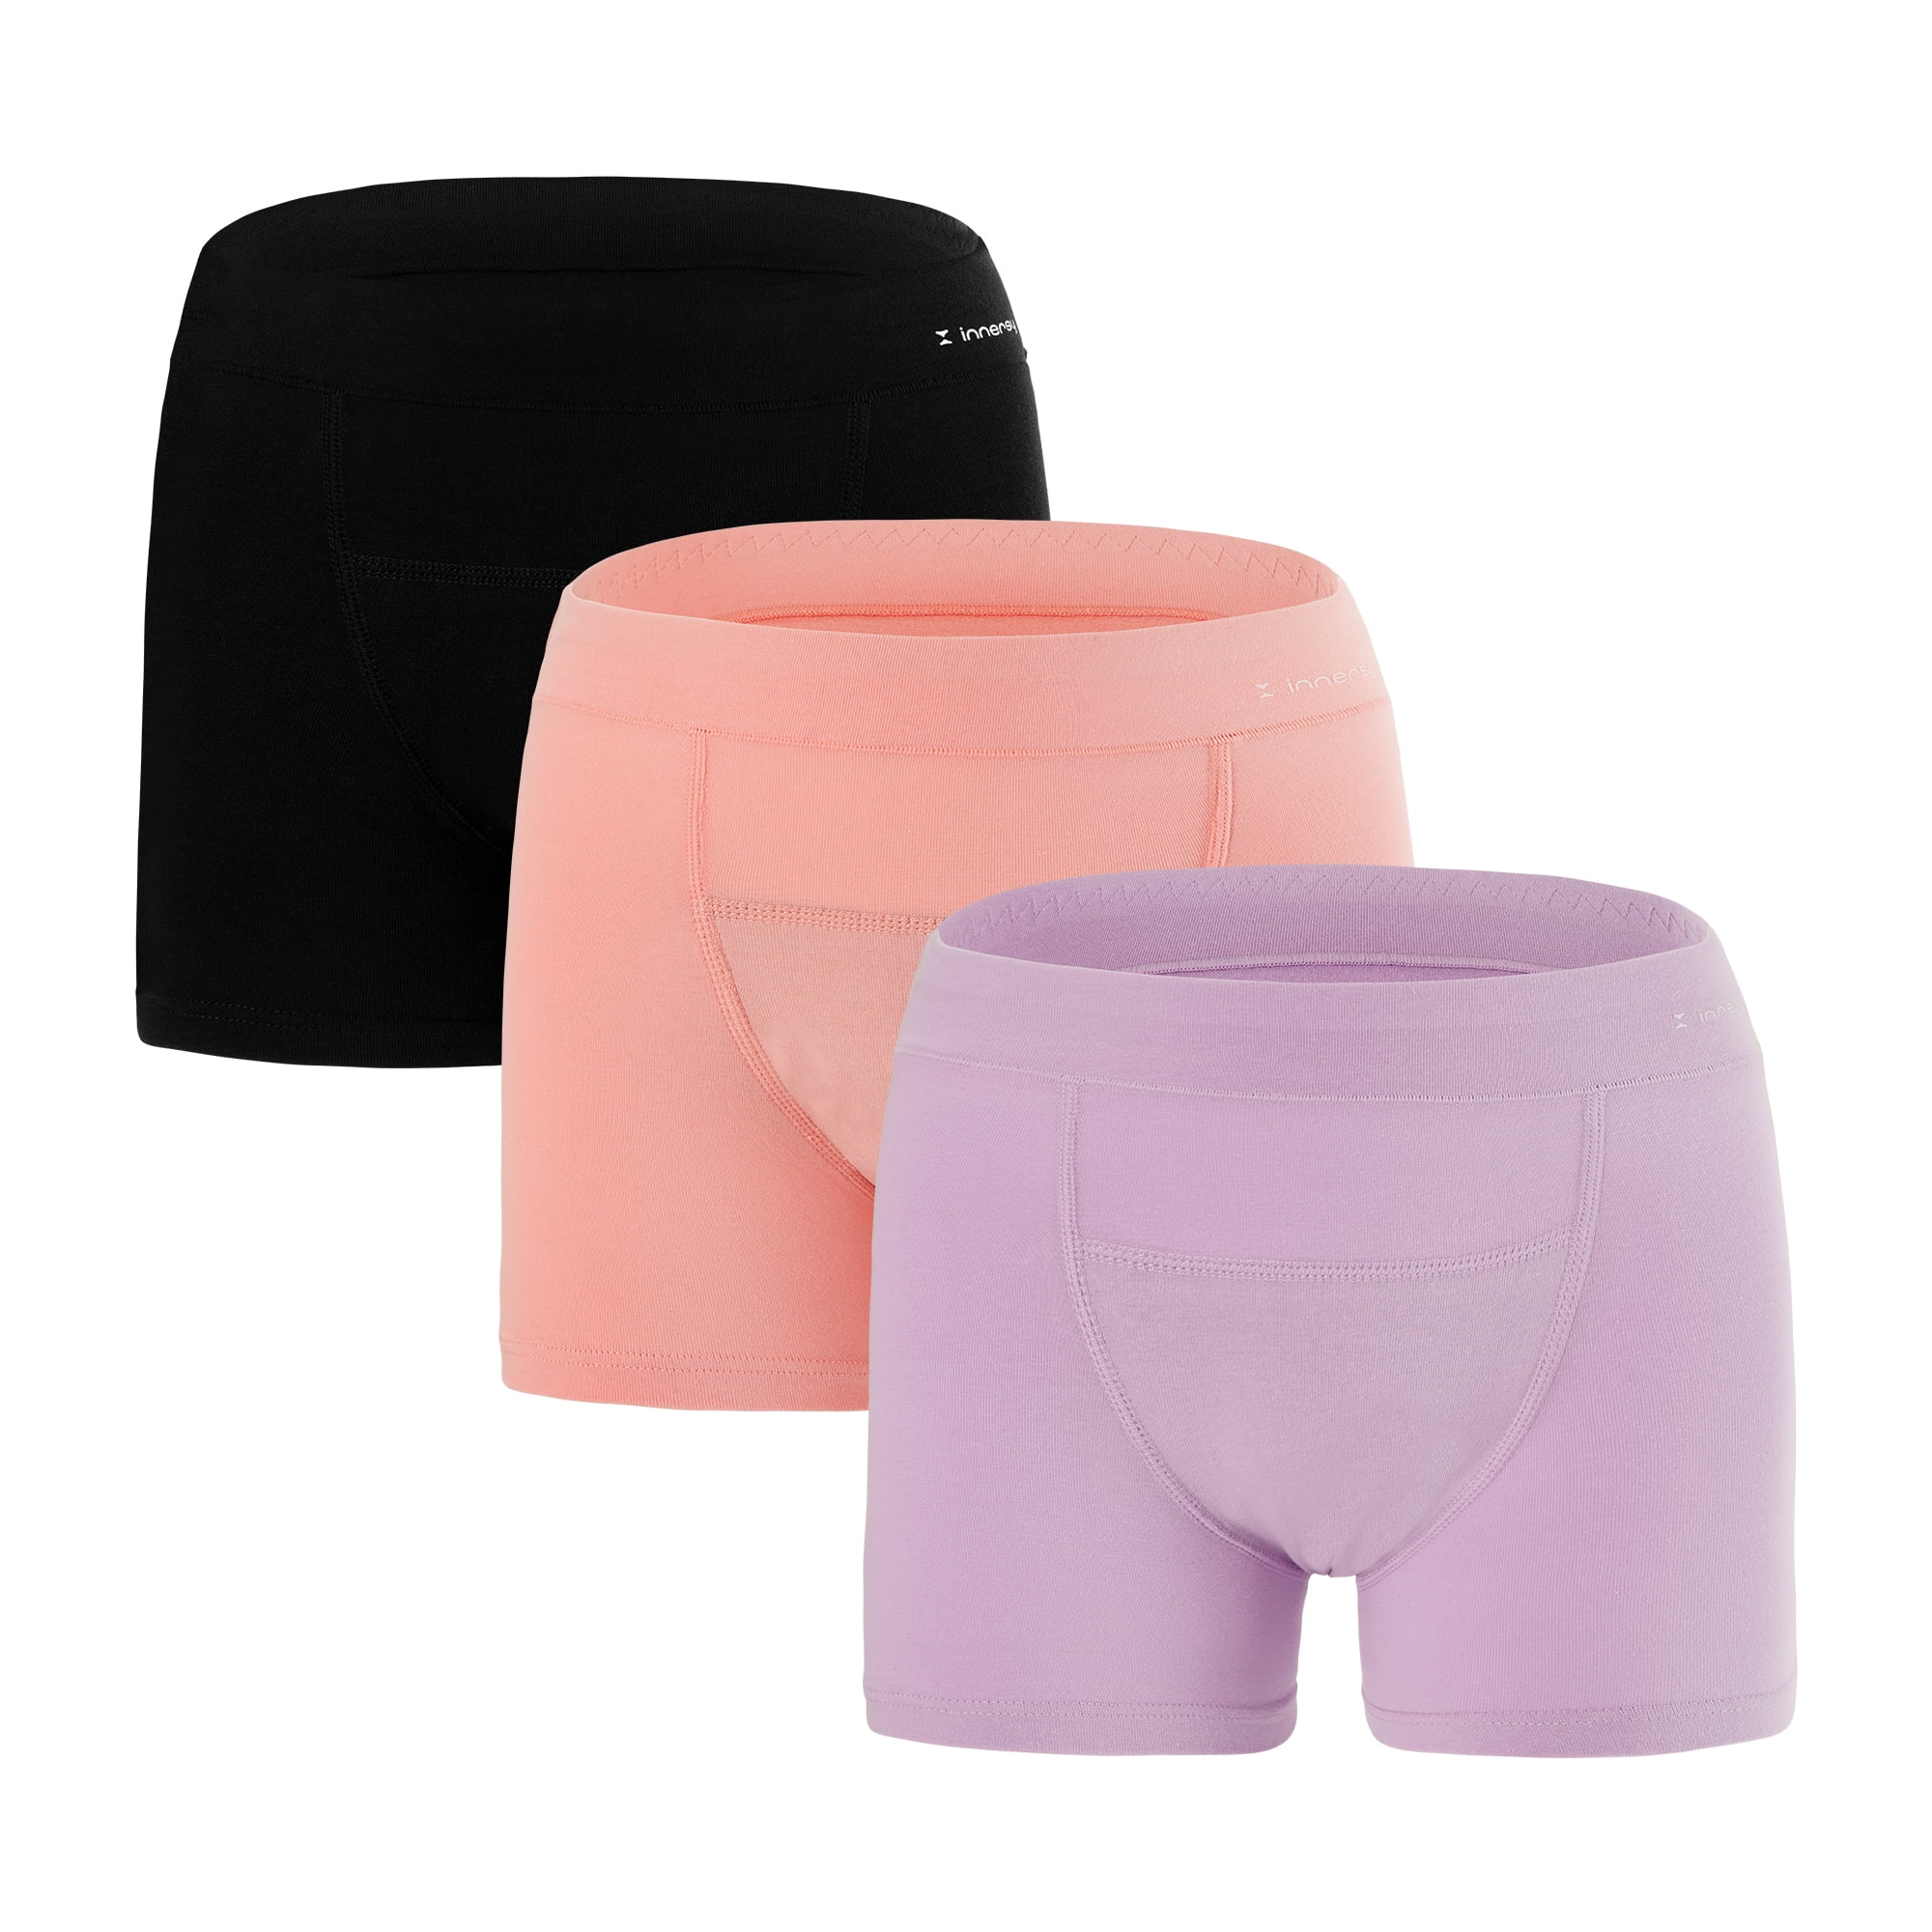 INNERSY Girls' Period Underwear for Teens Age 8-16 Cotton Boxers Panties  3-Pack(XL(14-16 yrs),Black/Pink/Puple) 